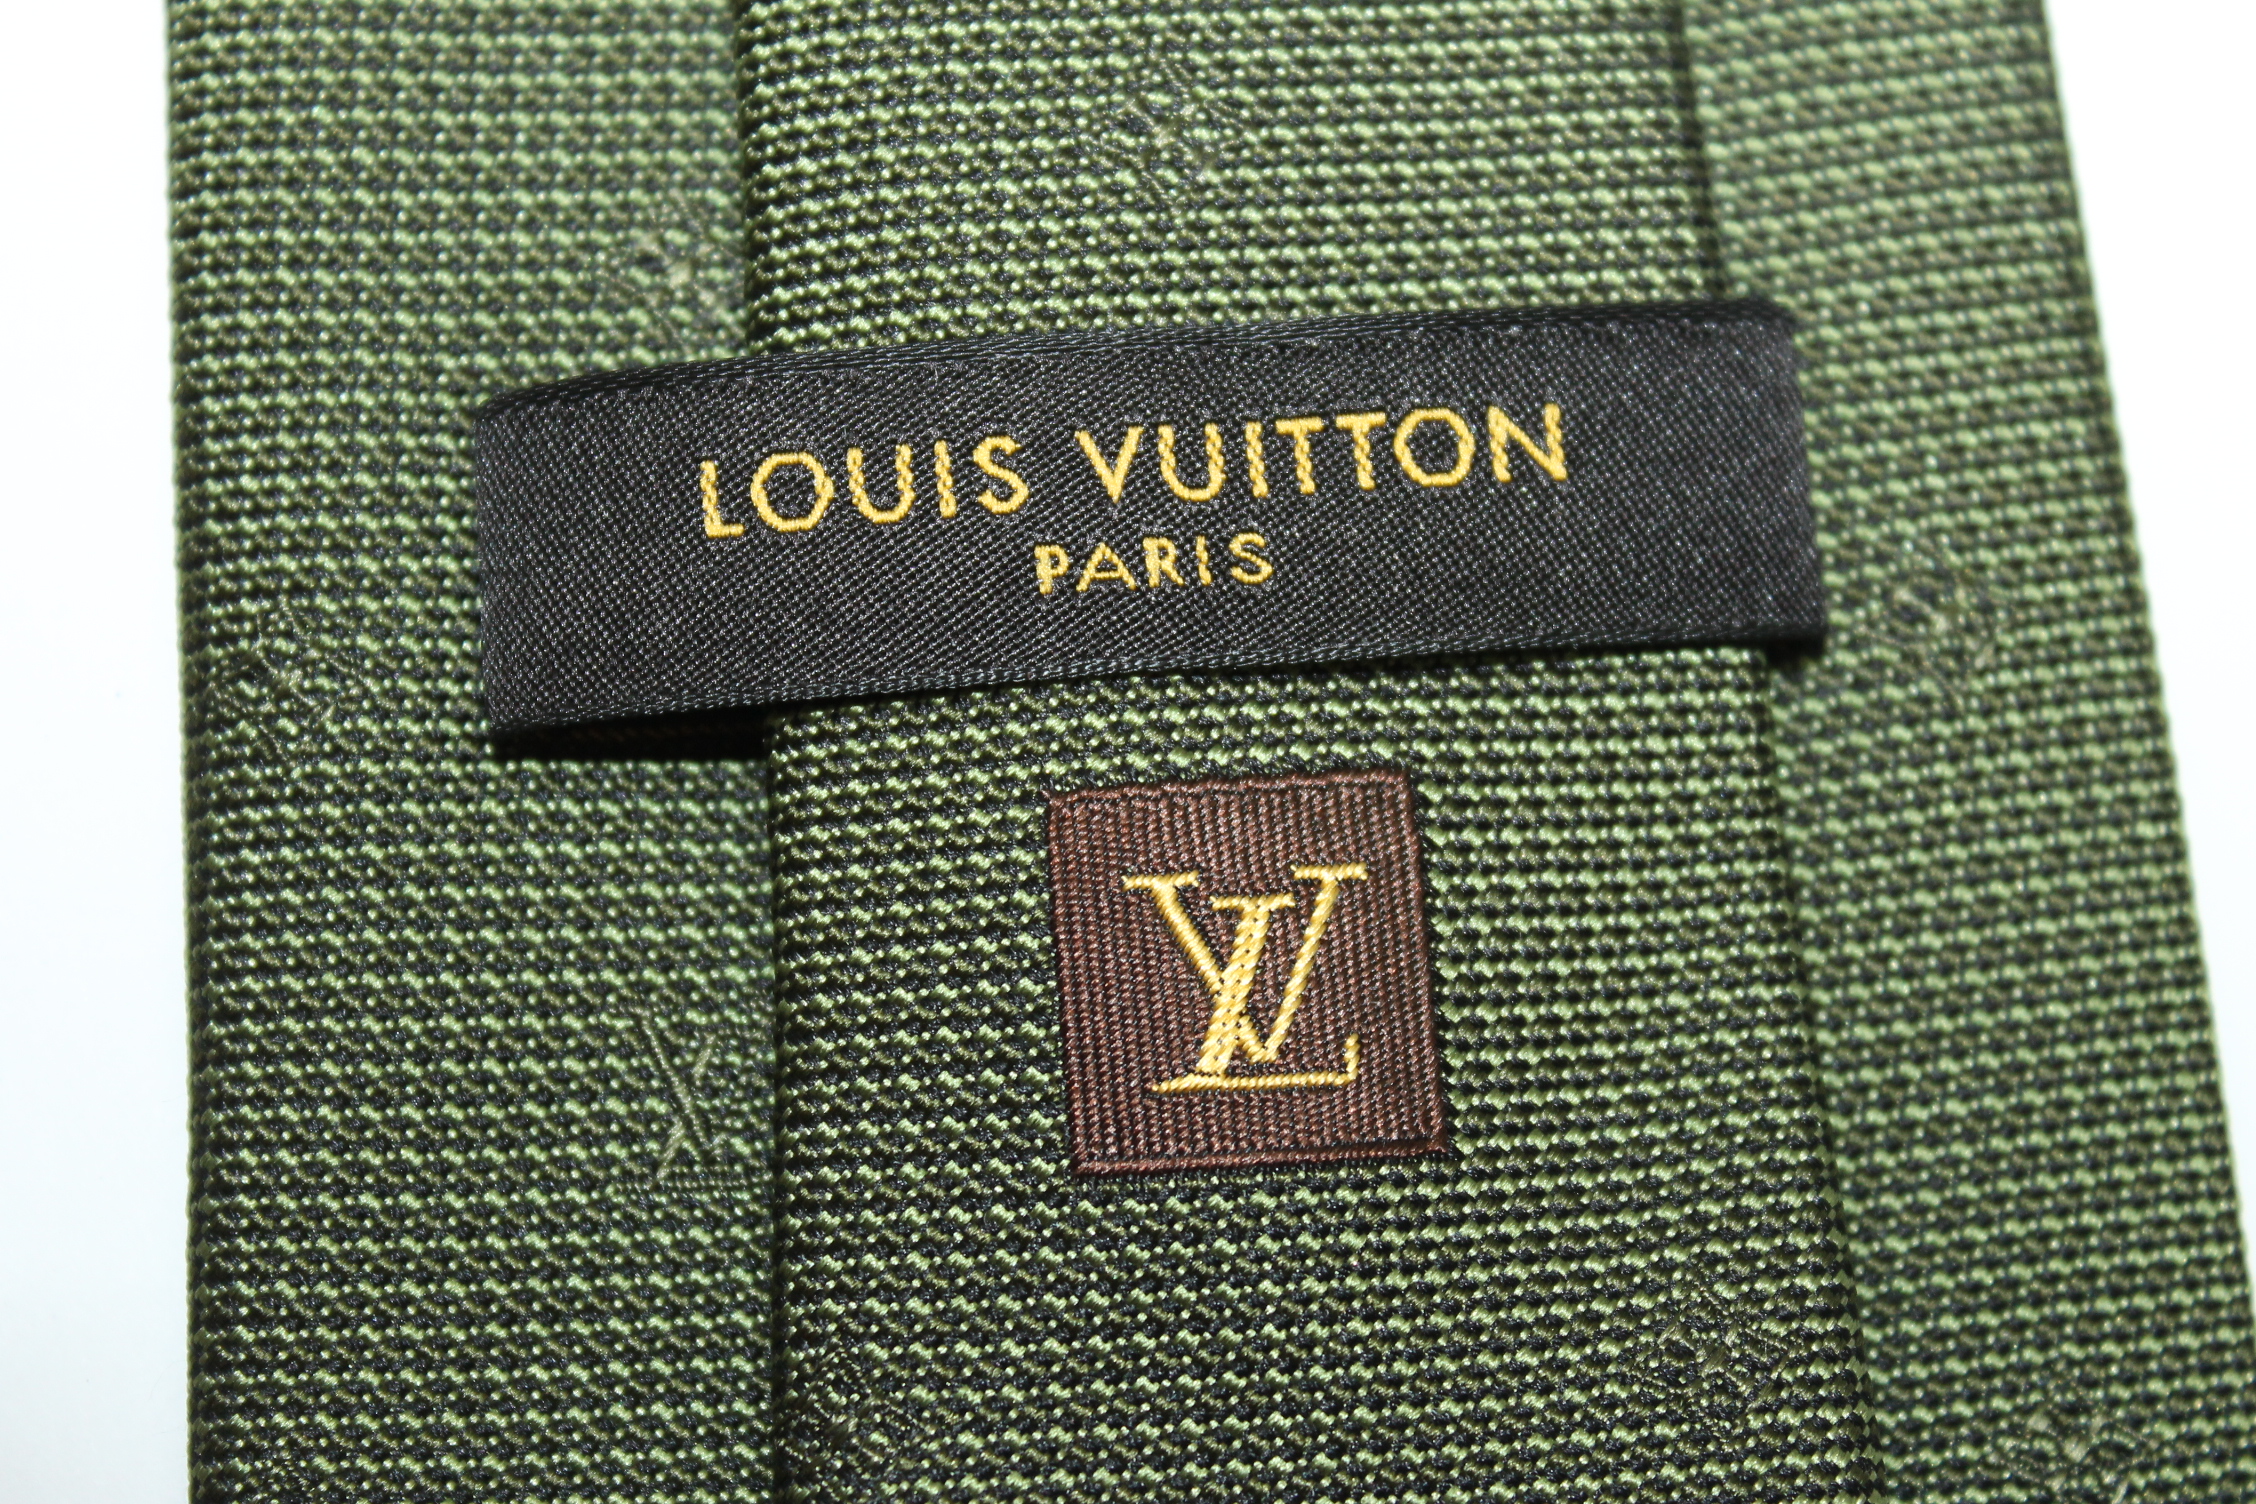 Know about Louis Vuitton ties, fake or original